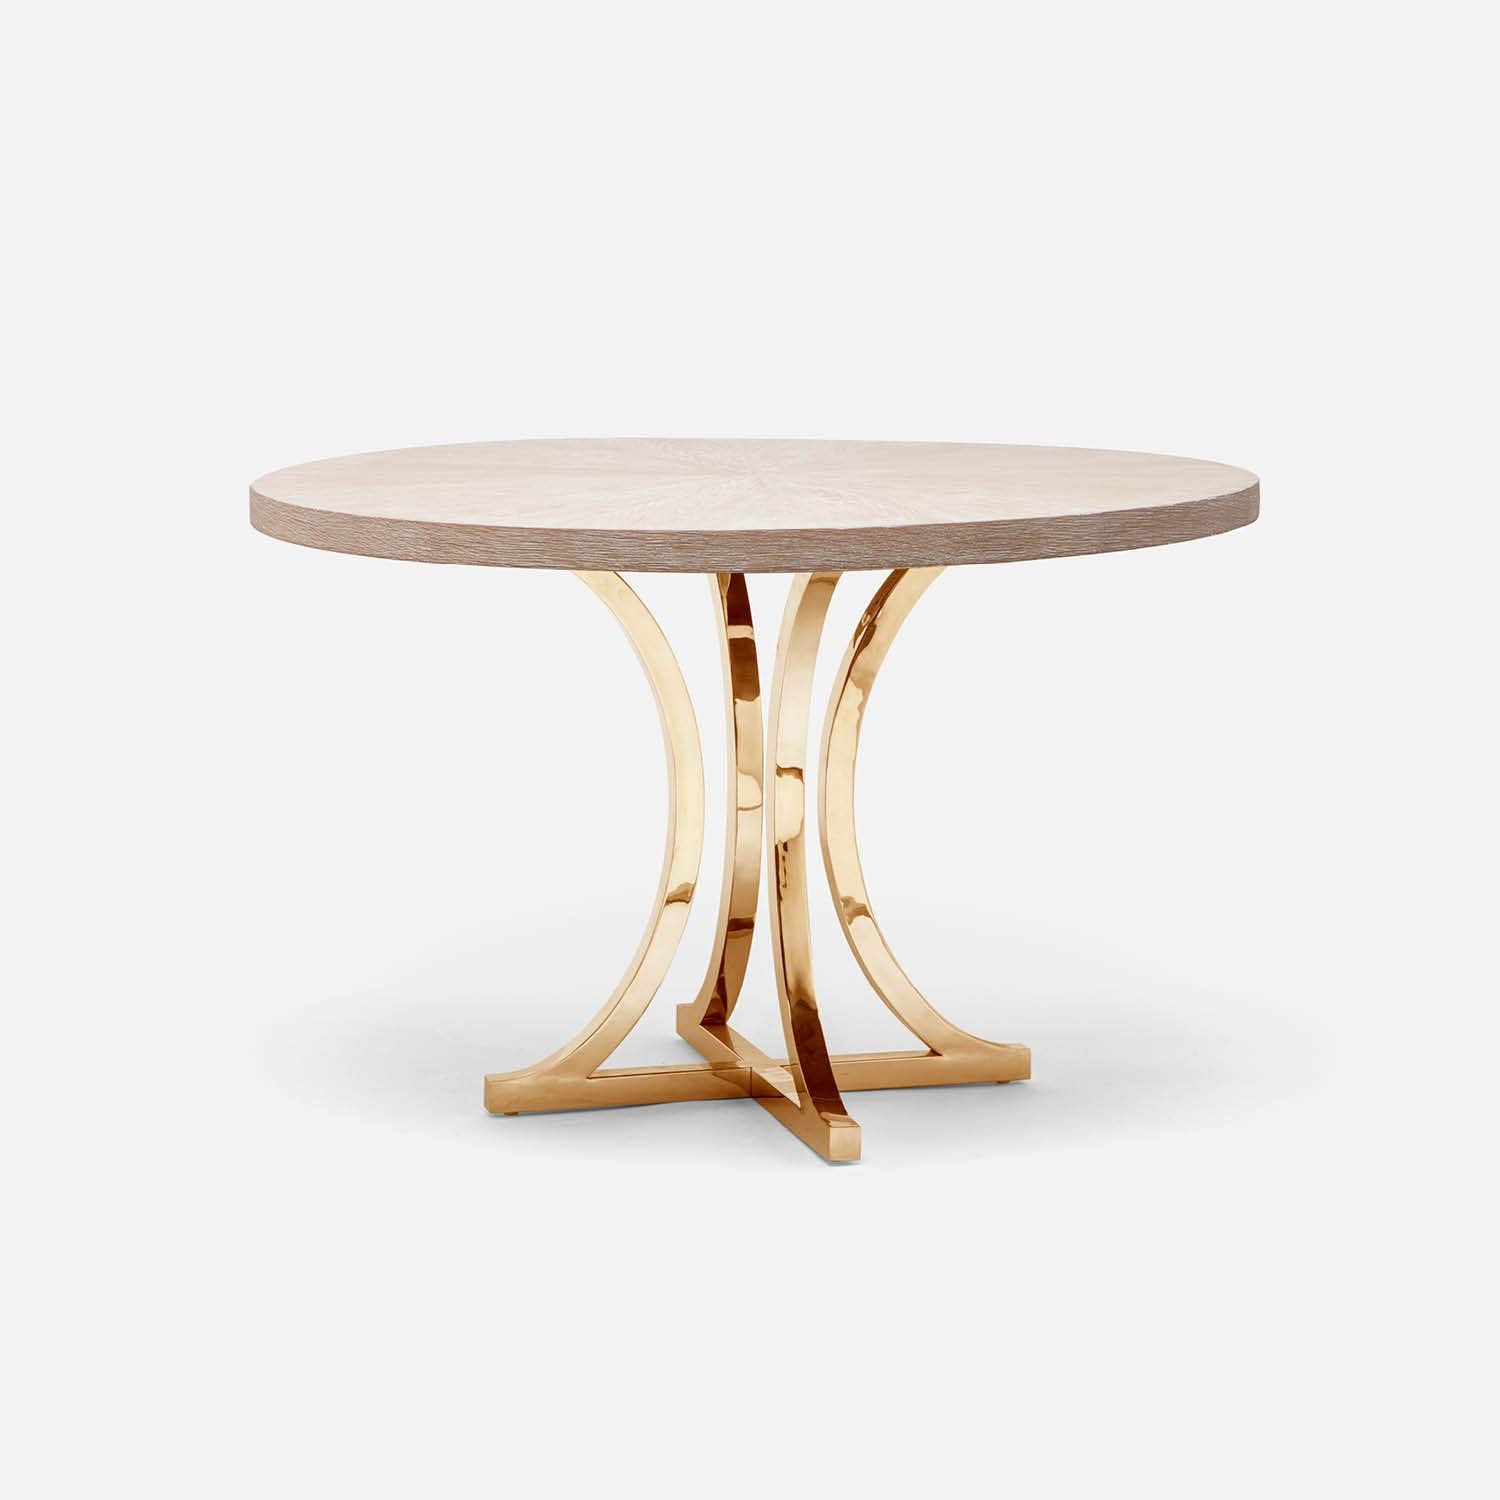 Made Goods Leighton 54" x 30" Polished Gold Steel Dinning Table With Round White Cerused Oak Table Top